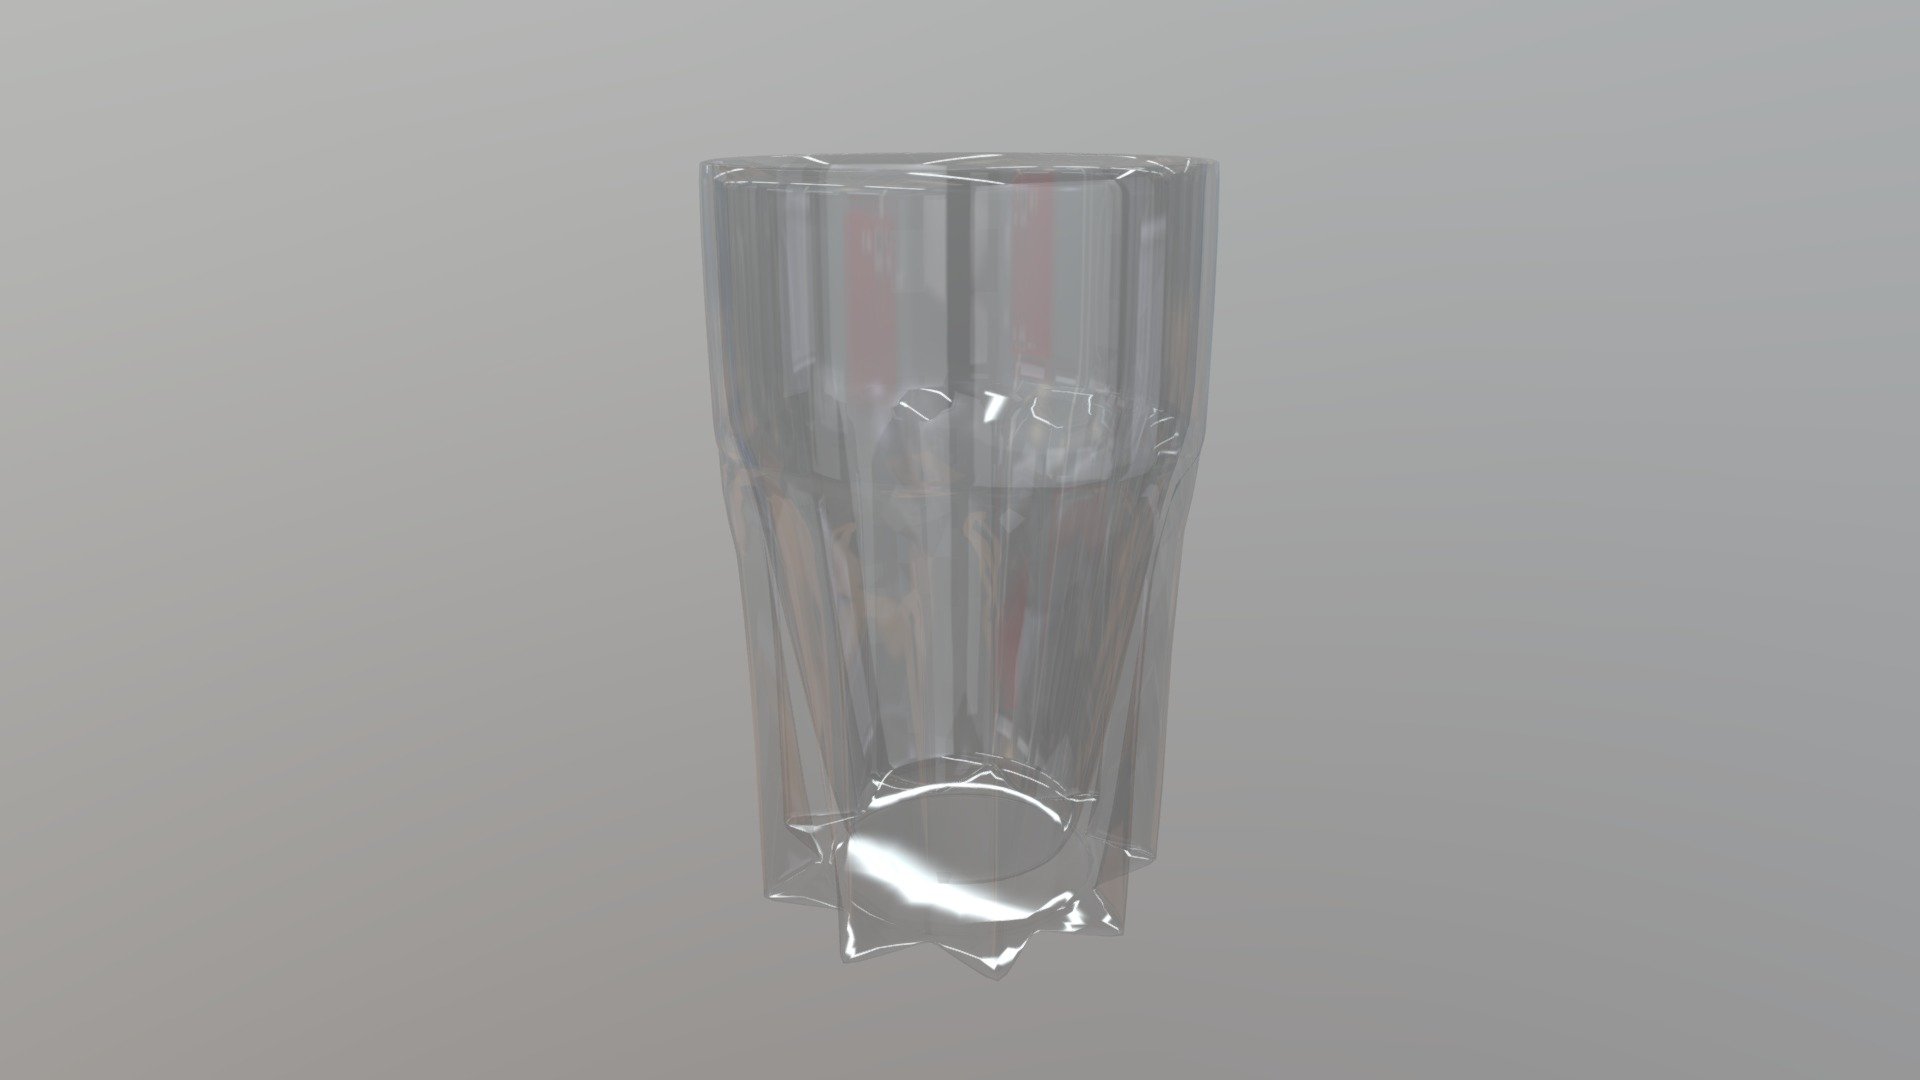 I made this glass cup today, so that I could get a could items uploaded to sketchfab. I am basically trying to get better at 3D modelling using C4D, by measuring the items in front of me at the time and practicing material lighting on them.

Hopefully I get to bigger models and I can teach myself to use texturing better 3d model